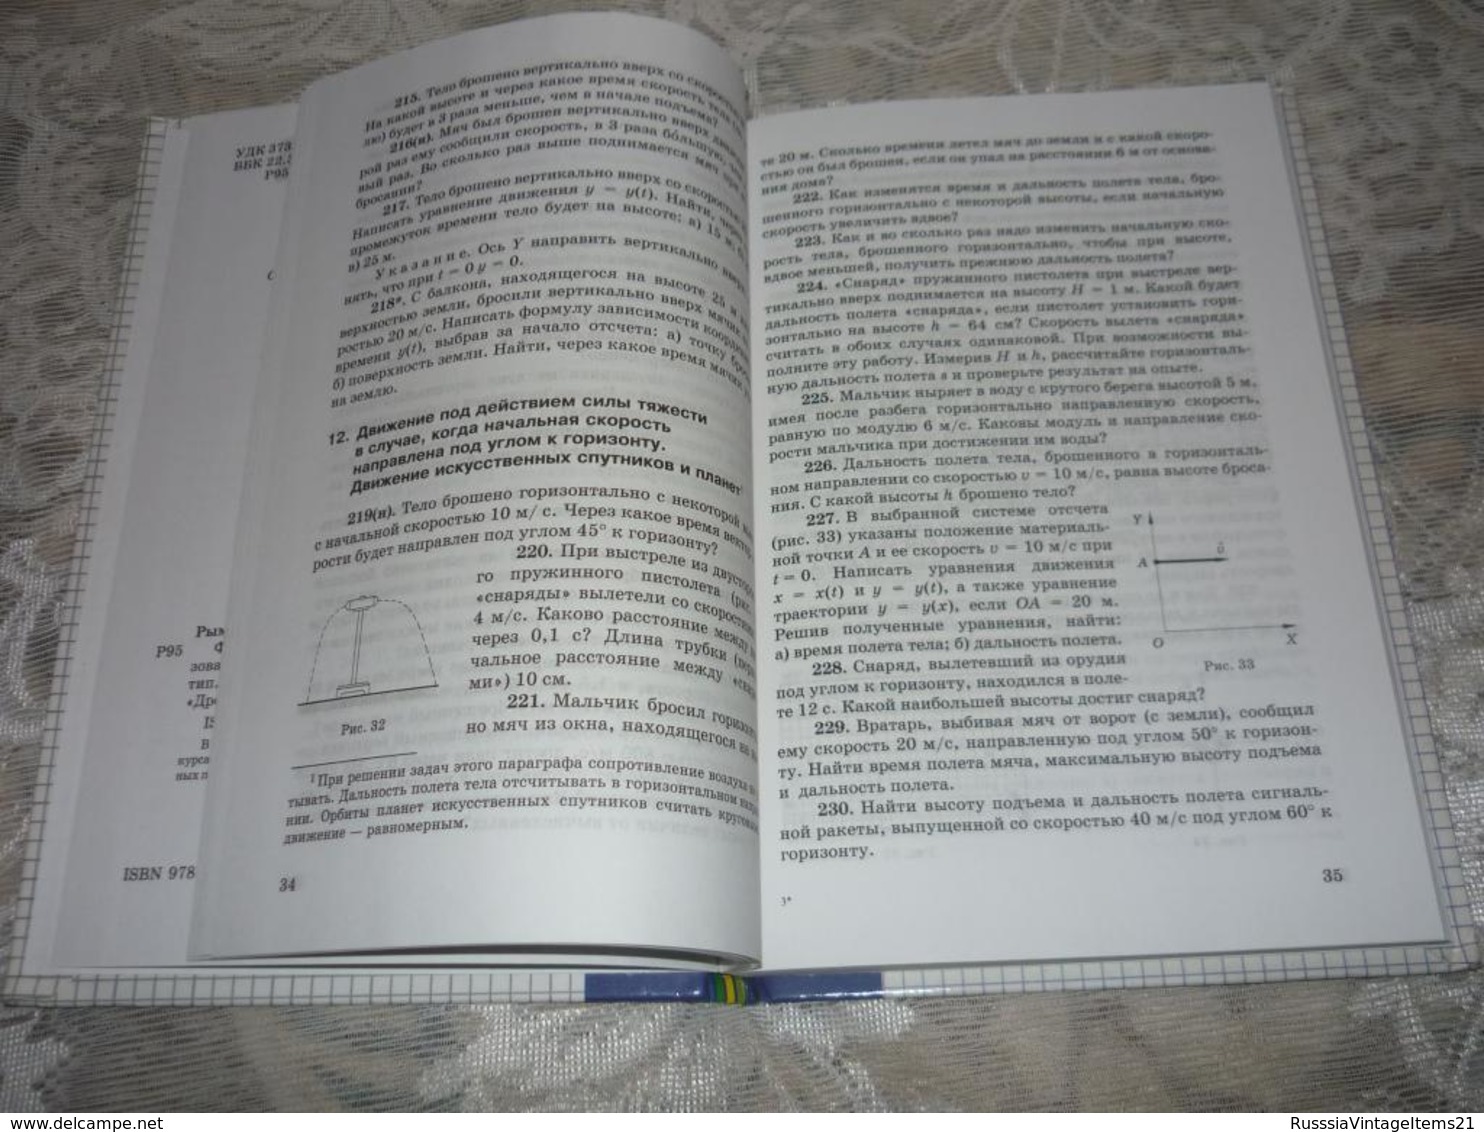 Russian Textbook - In Russian - Textbook From Russia - Rymkevich A. Physics. Problem Book   10-11 Classes. - Langues Slaves